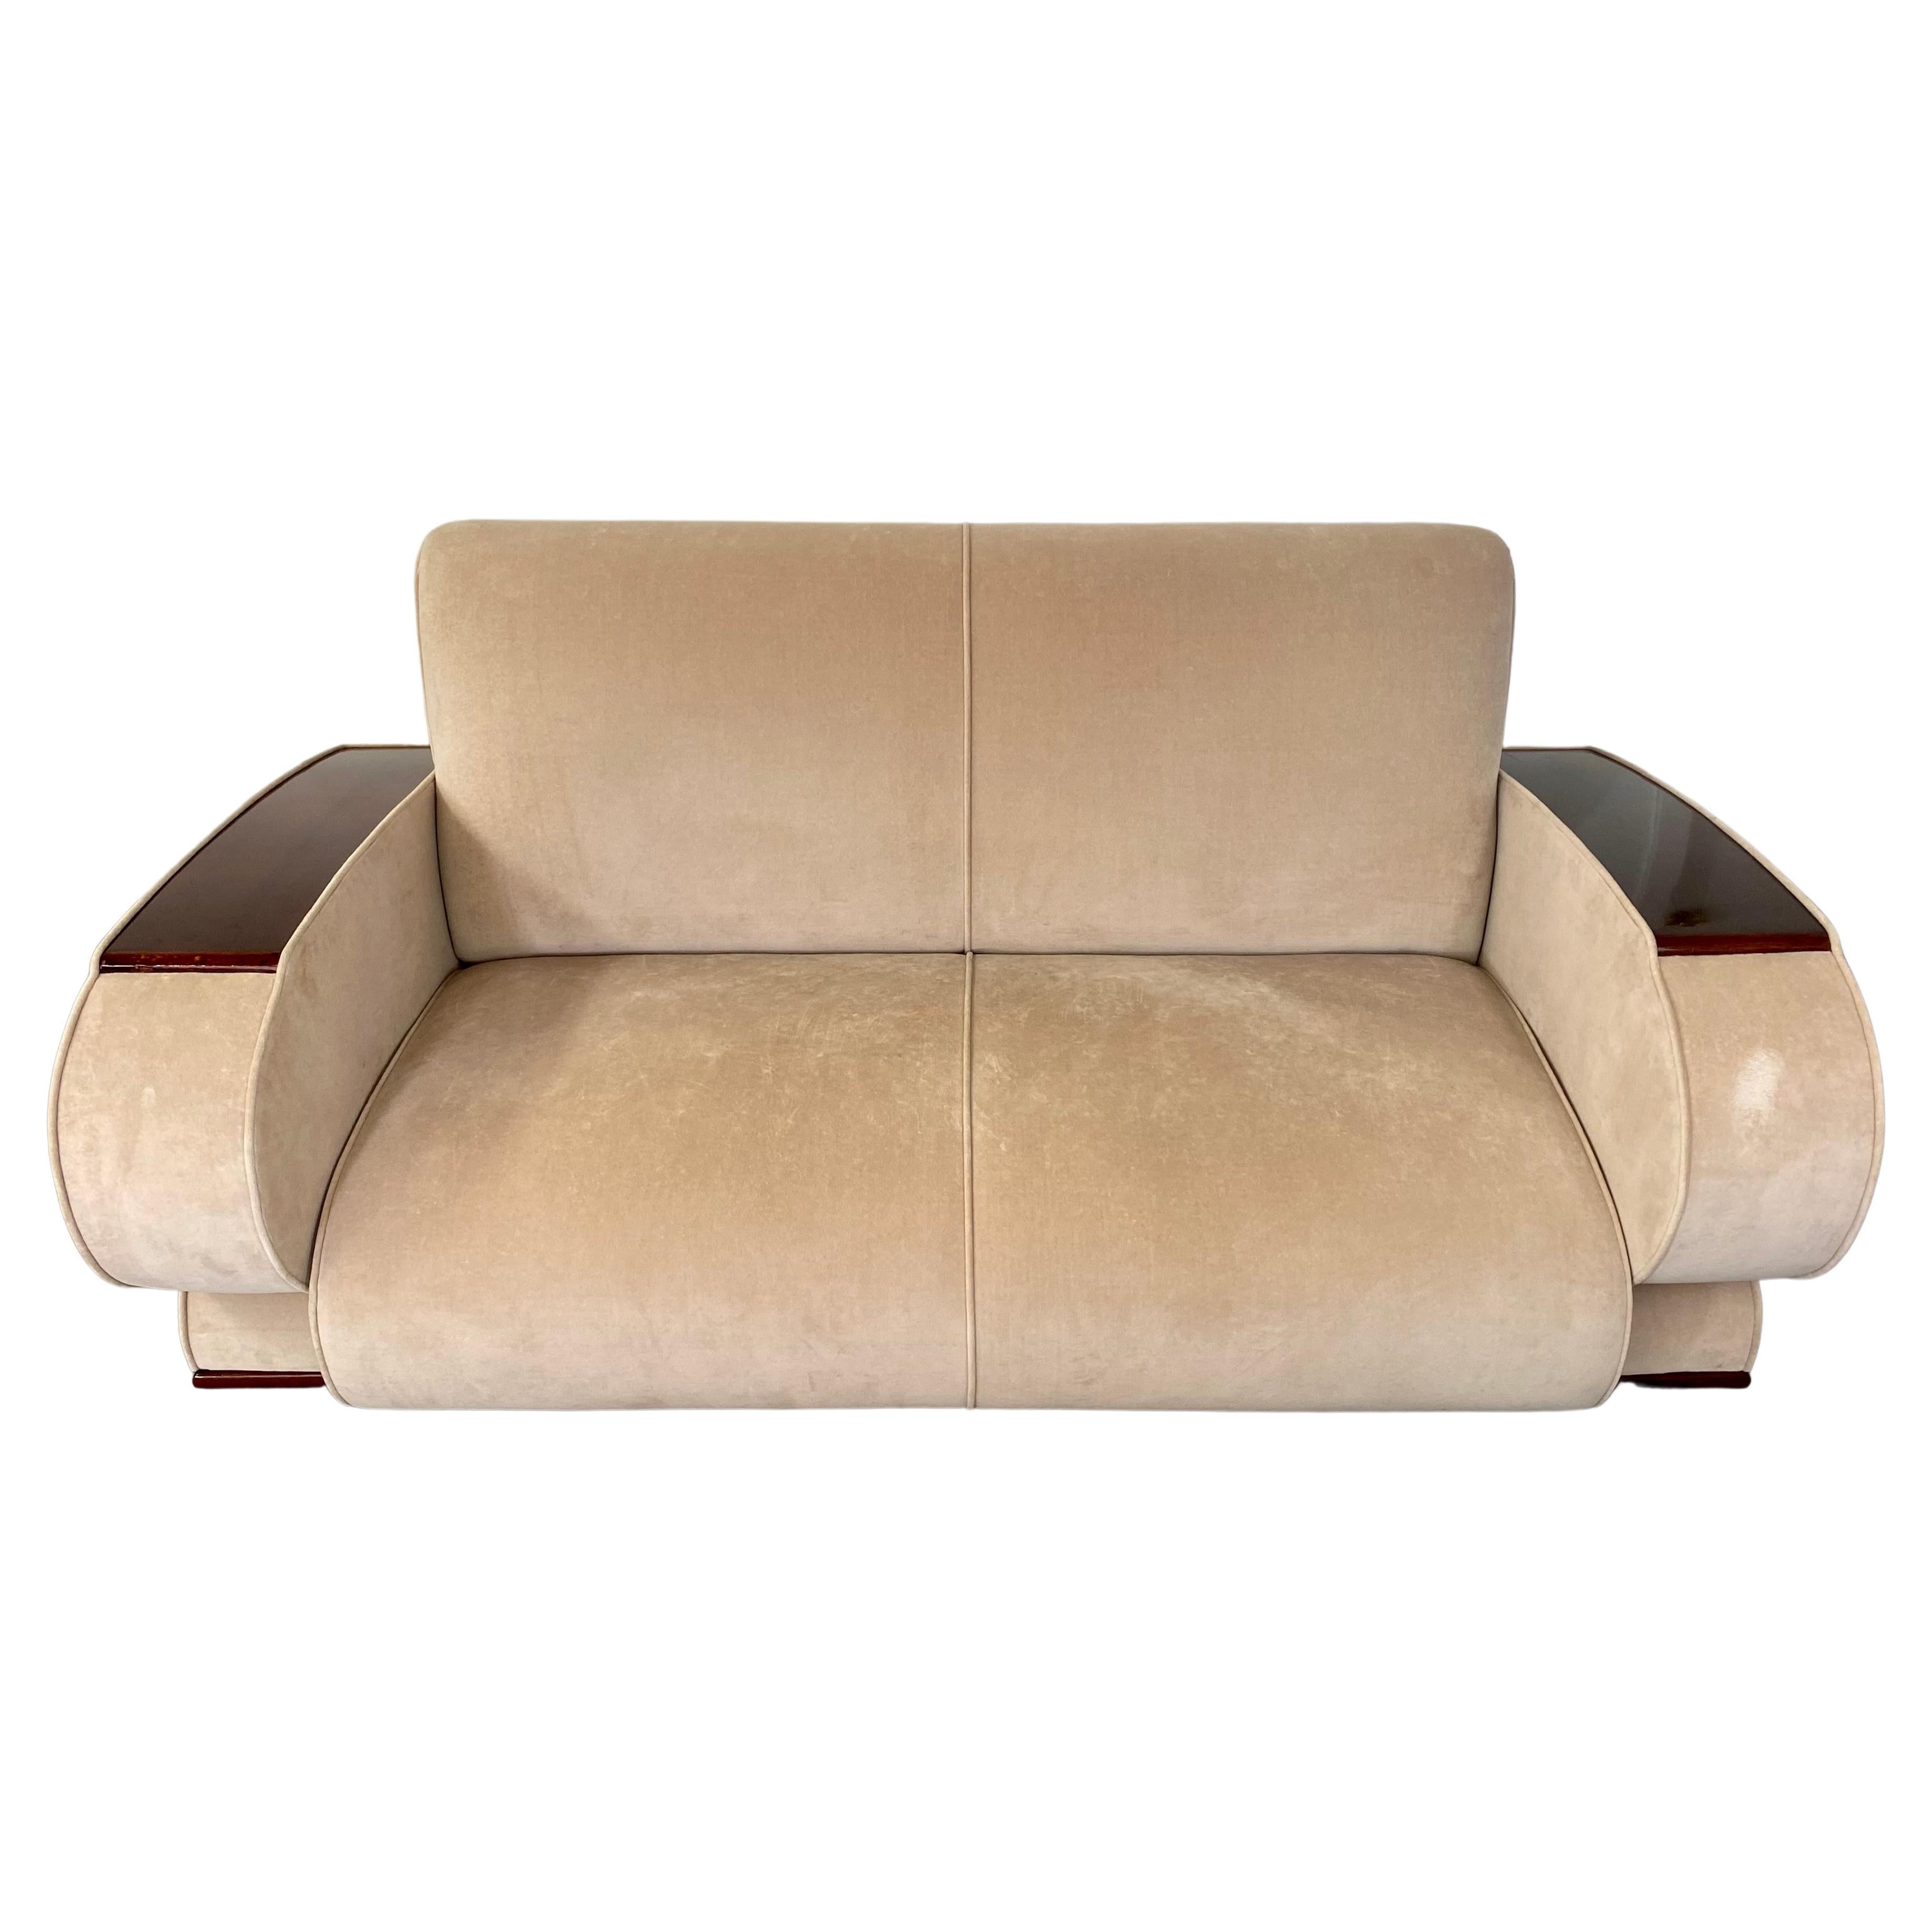 French Art Deco Sofa or Settee with Beige Suede Upholstery & Rosewood Armrests  For Sale